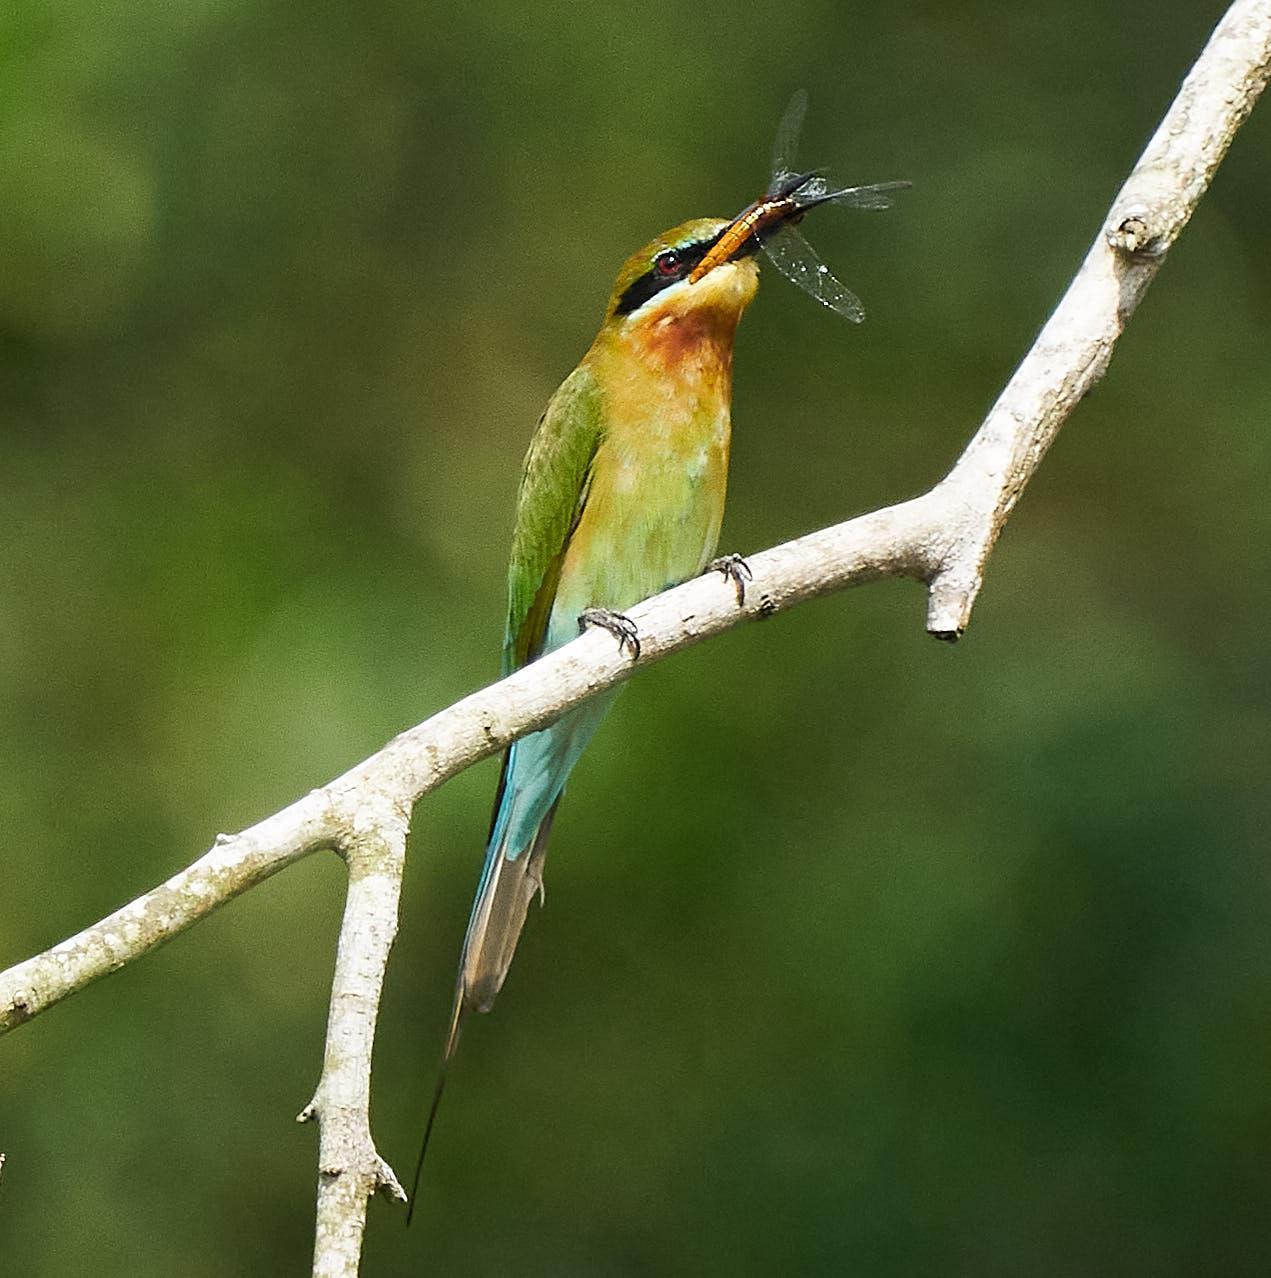 Blue-tailed Bee-eater Photo by Steven Cheong